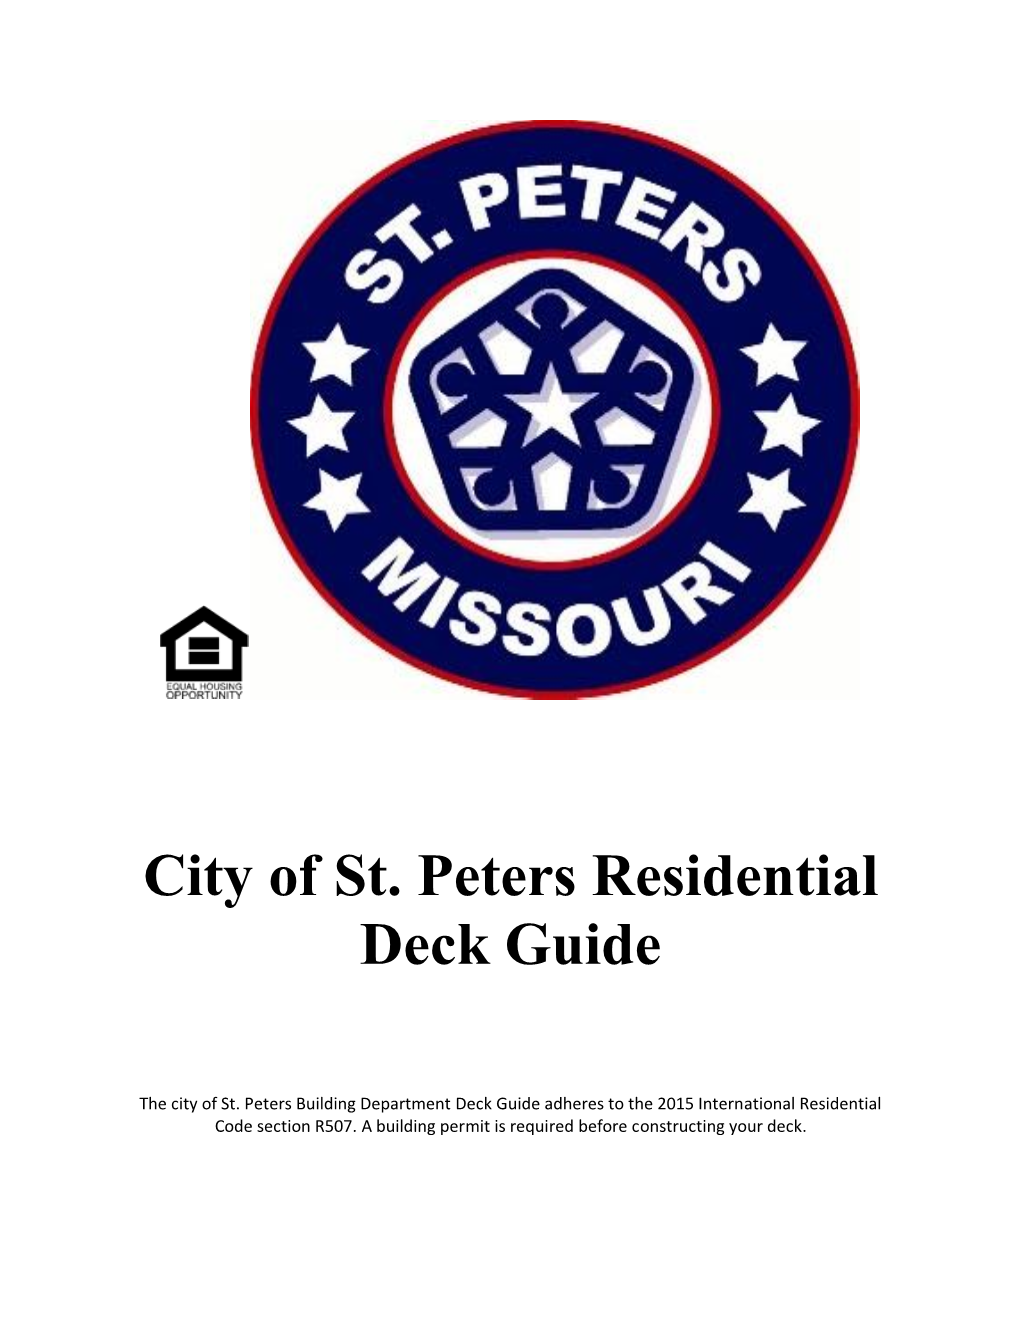 City of St. Peters Residential Deck Guide